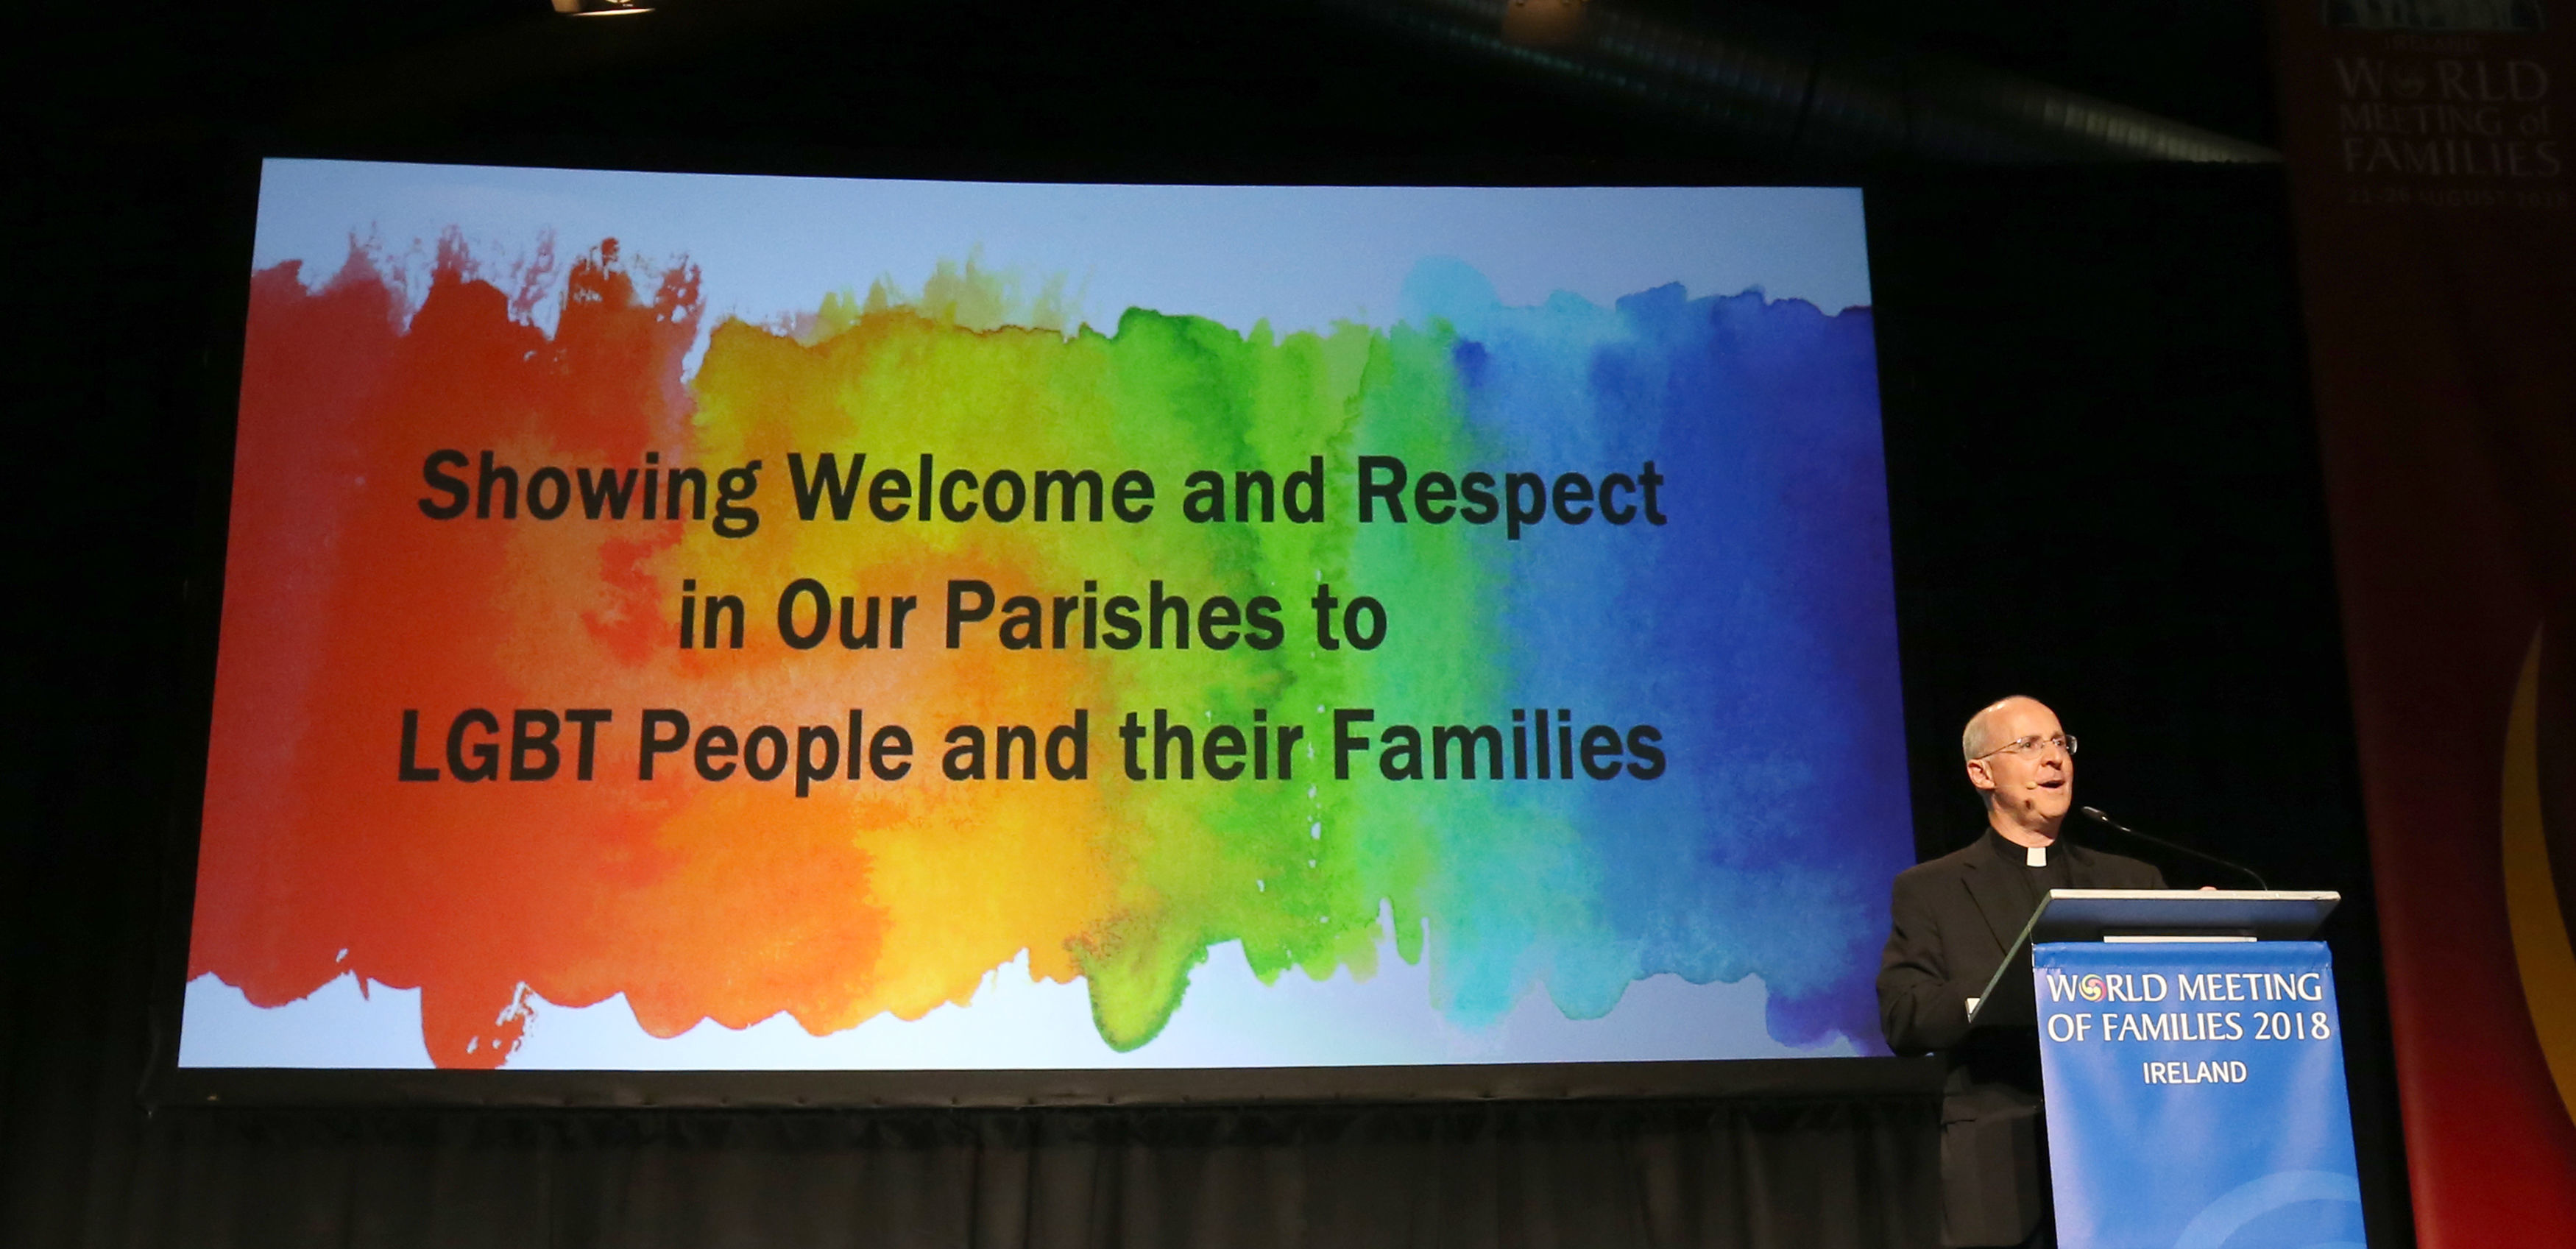 A Good Measure: Showing Welcome and Respect in our Parishes for LGBT People and Their Families